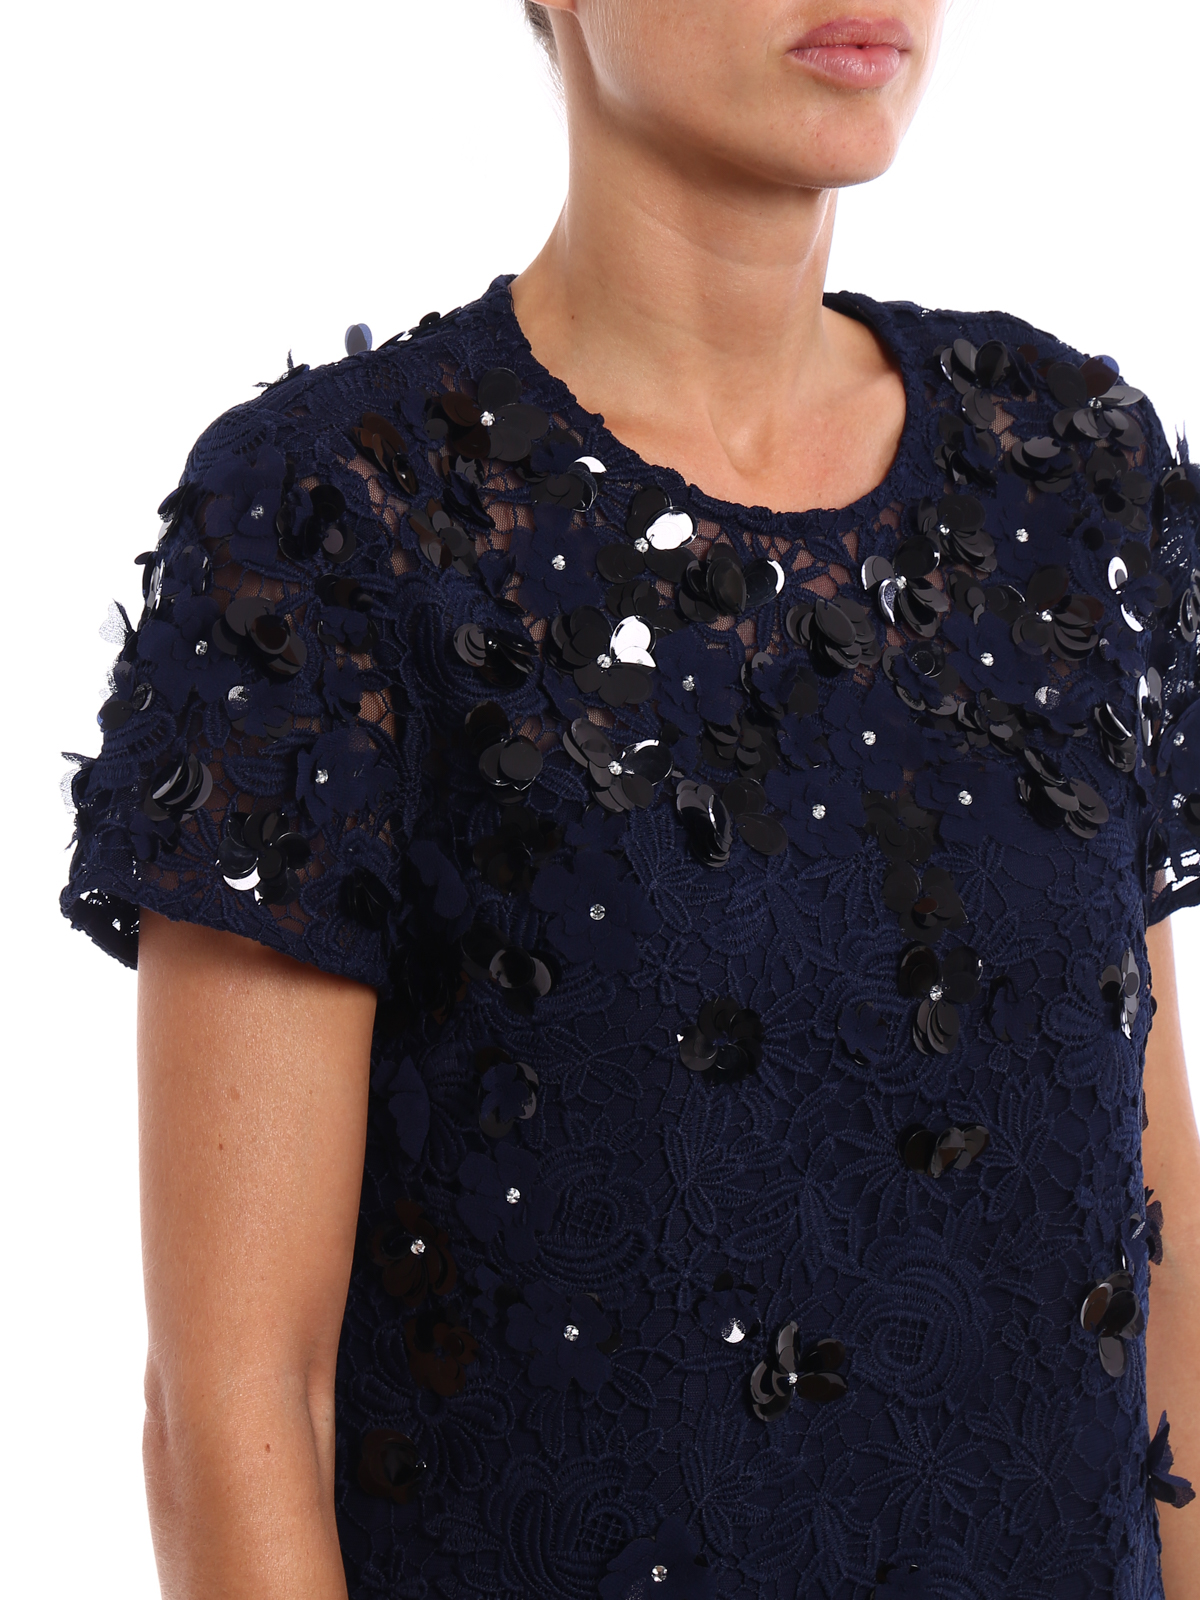 Michael Kors - Embellished lace and 